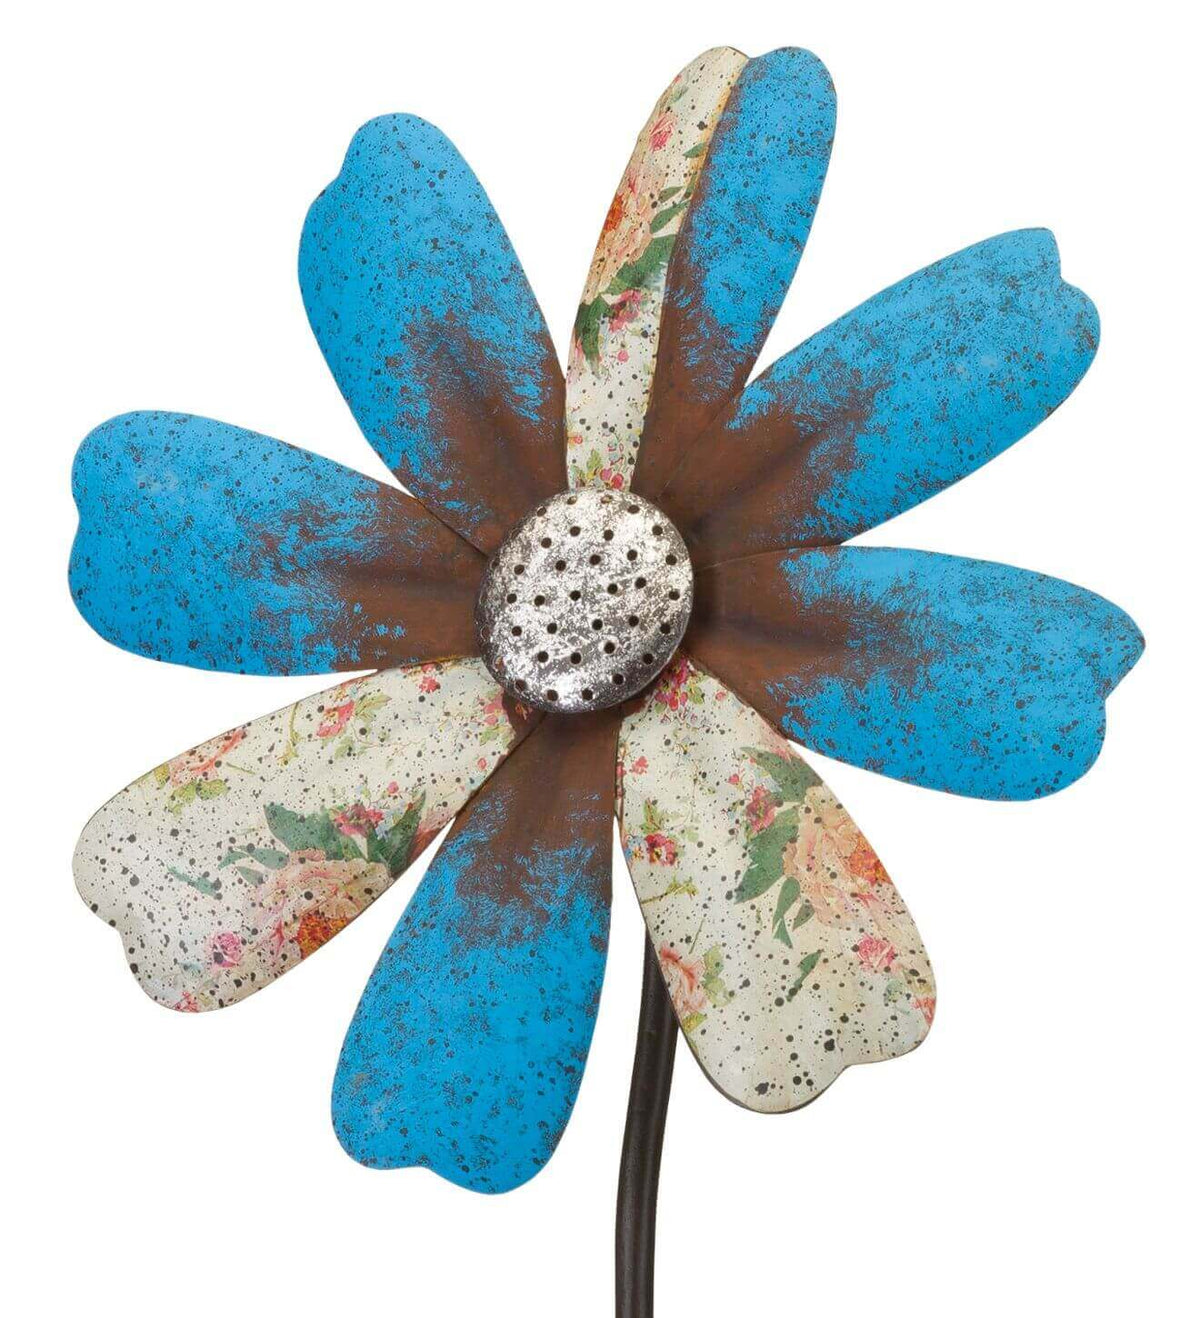 Stake Blue Flower Wind Spinner with Stake